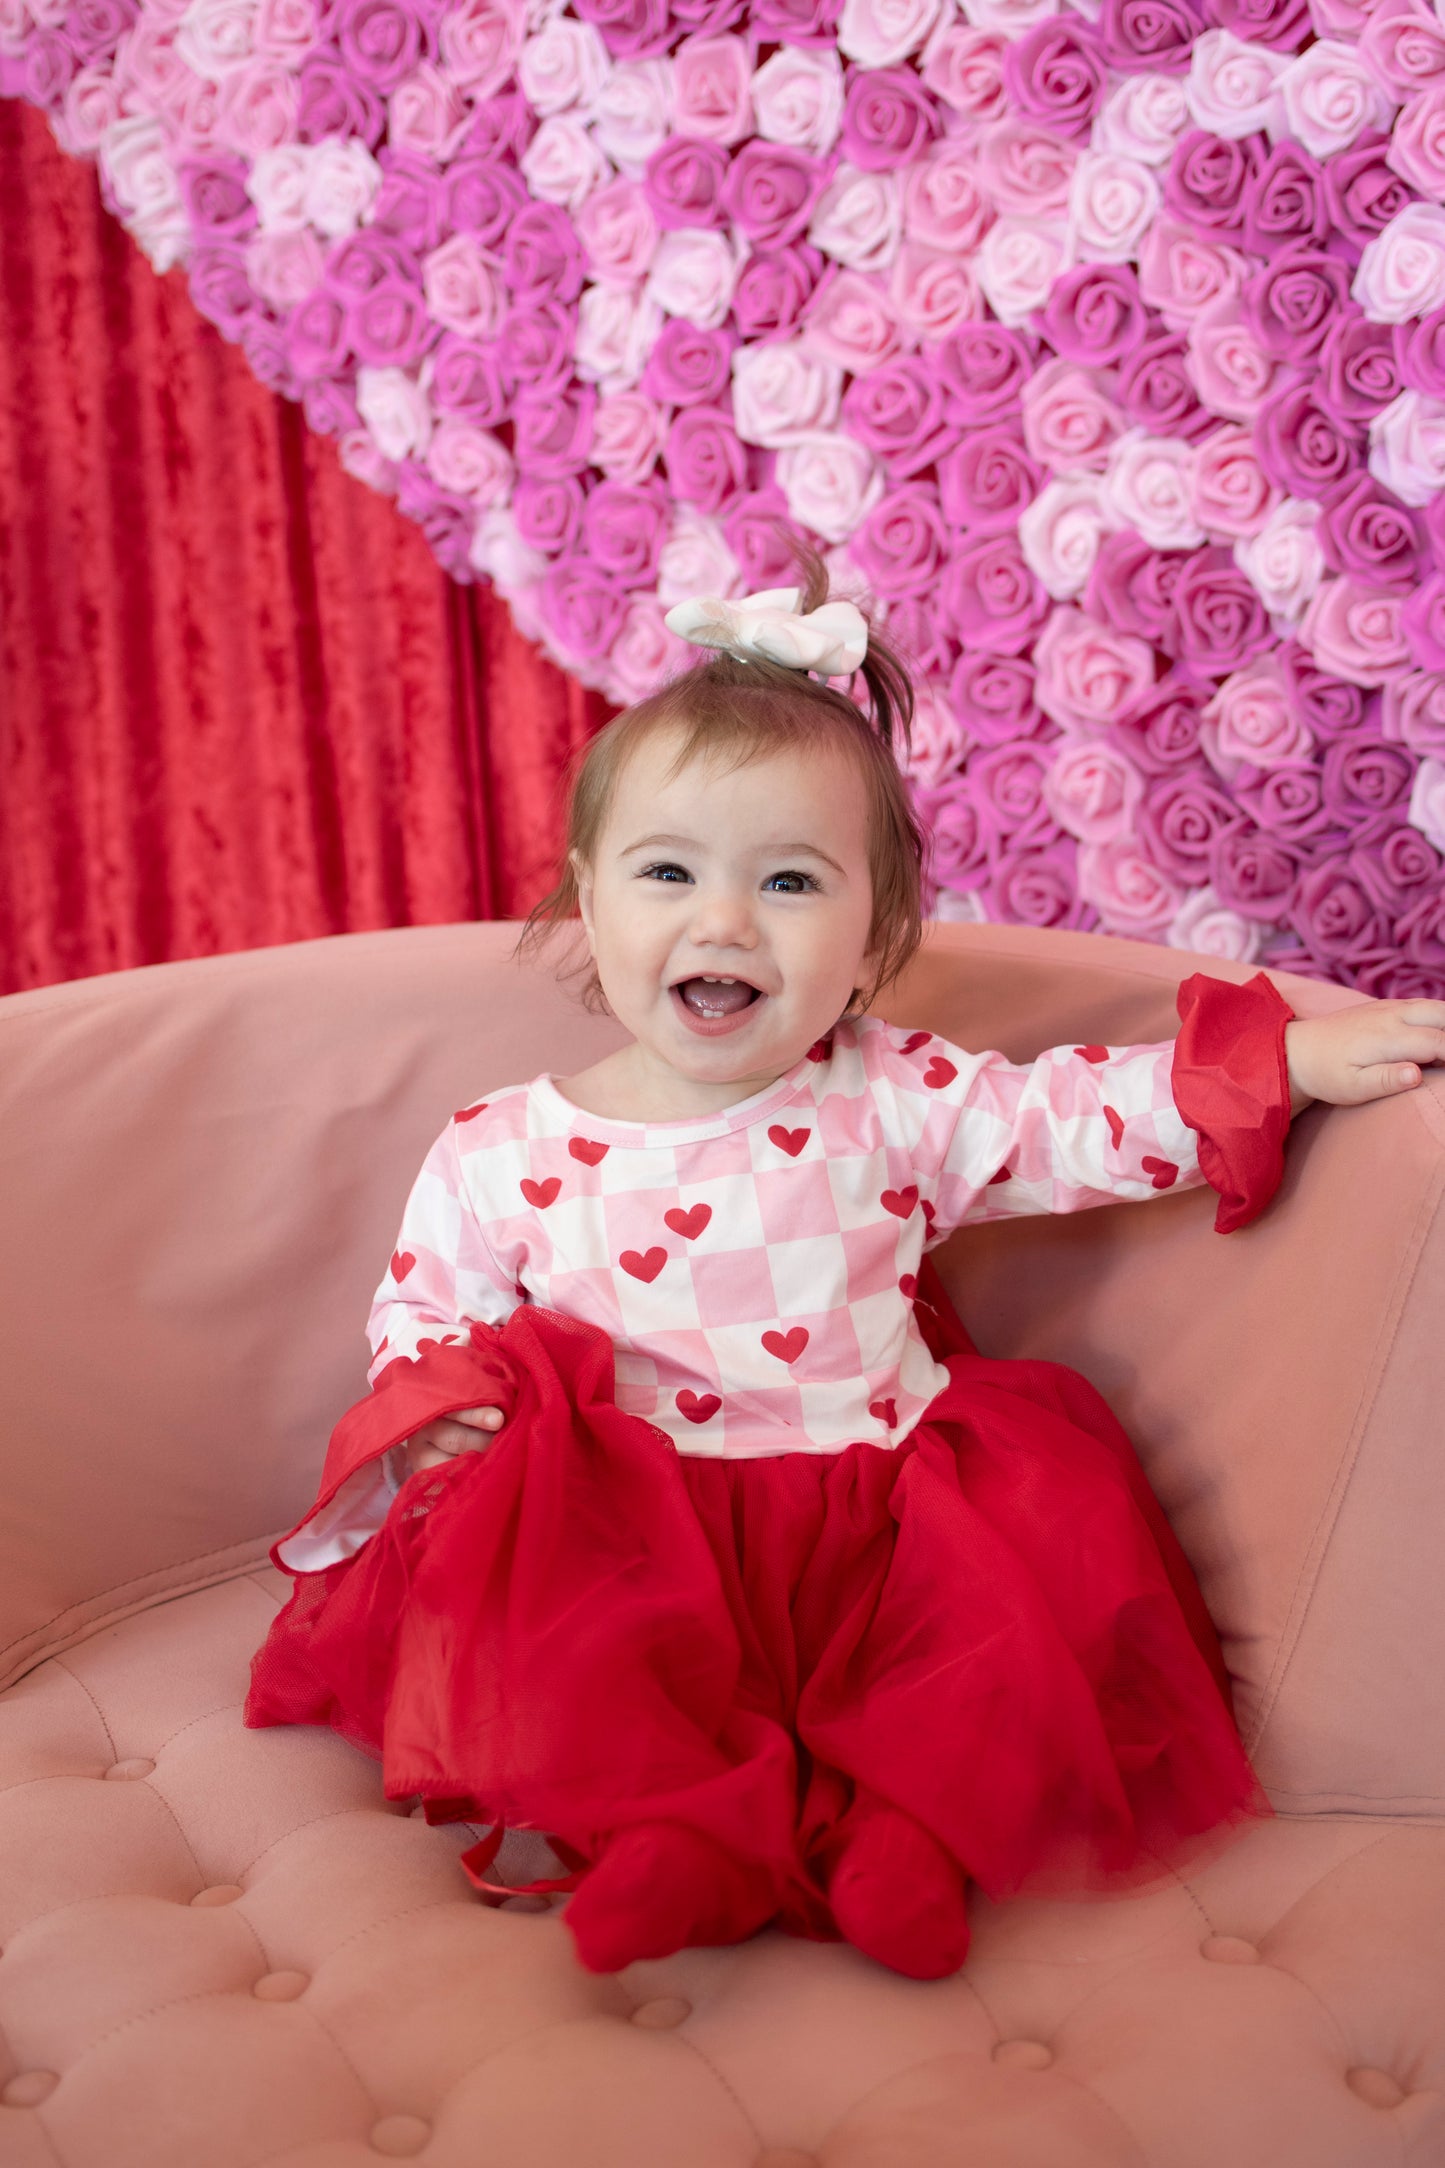 Red Heart Tutu Dress by Clover Cottage